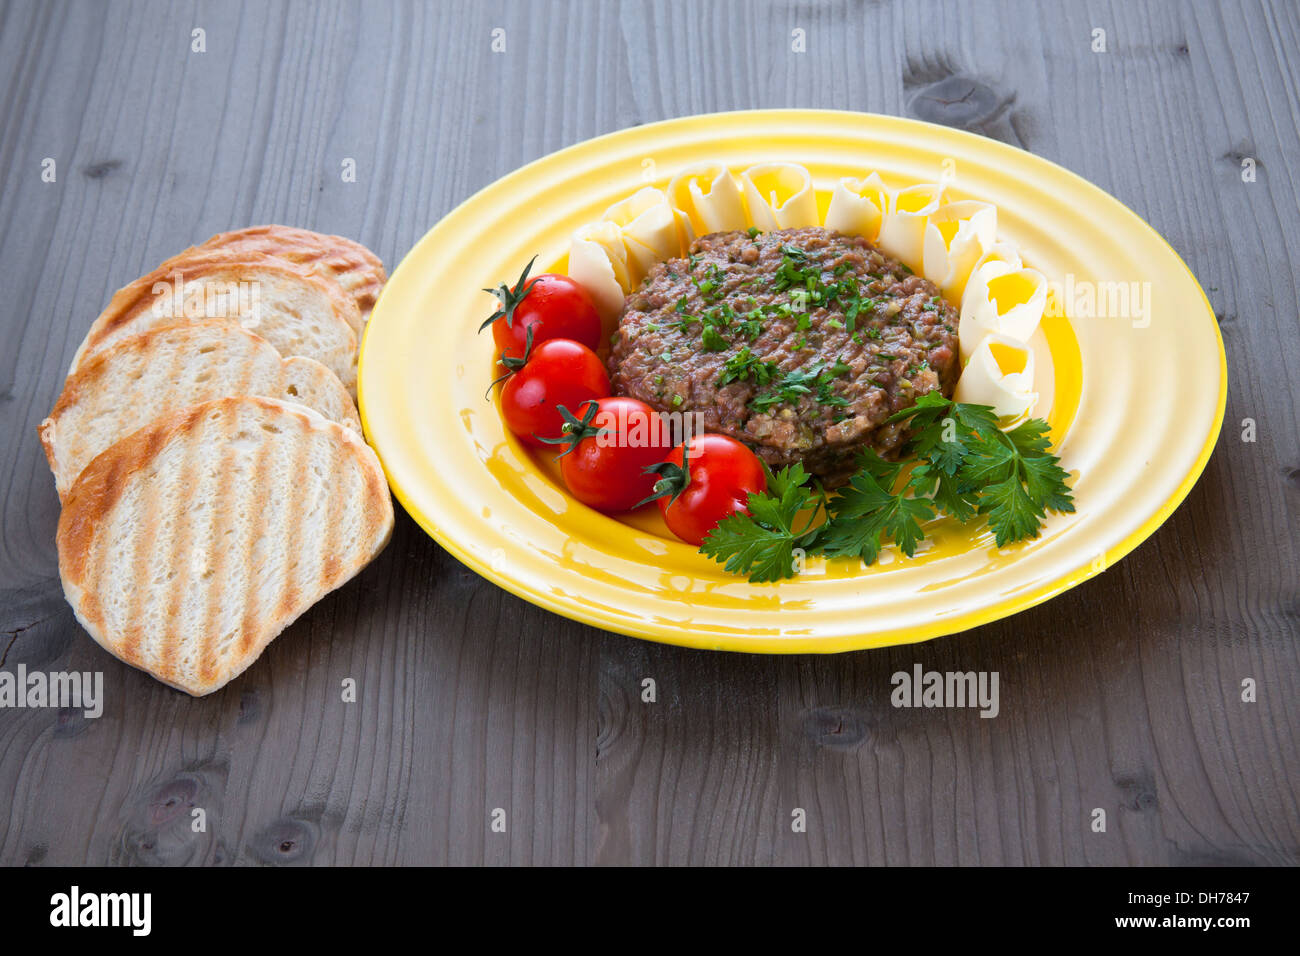 Steak tartare with toasted bread, tomatoes and butter on yellow plate Stock Photo